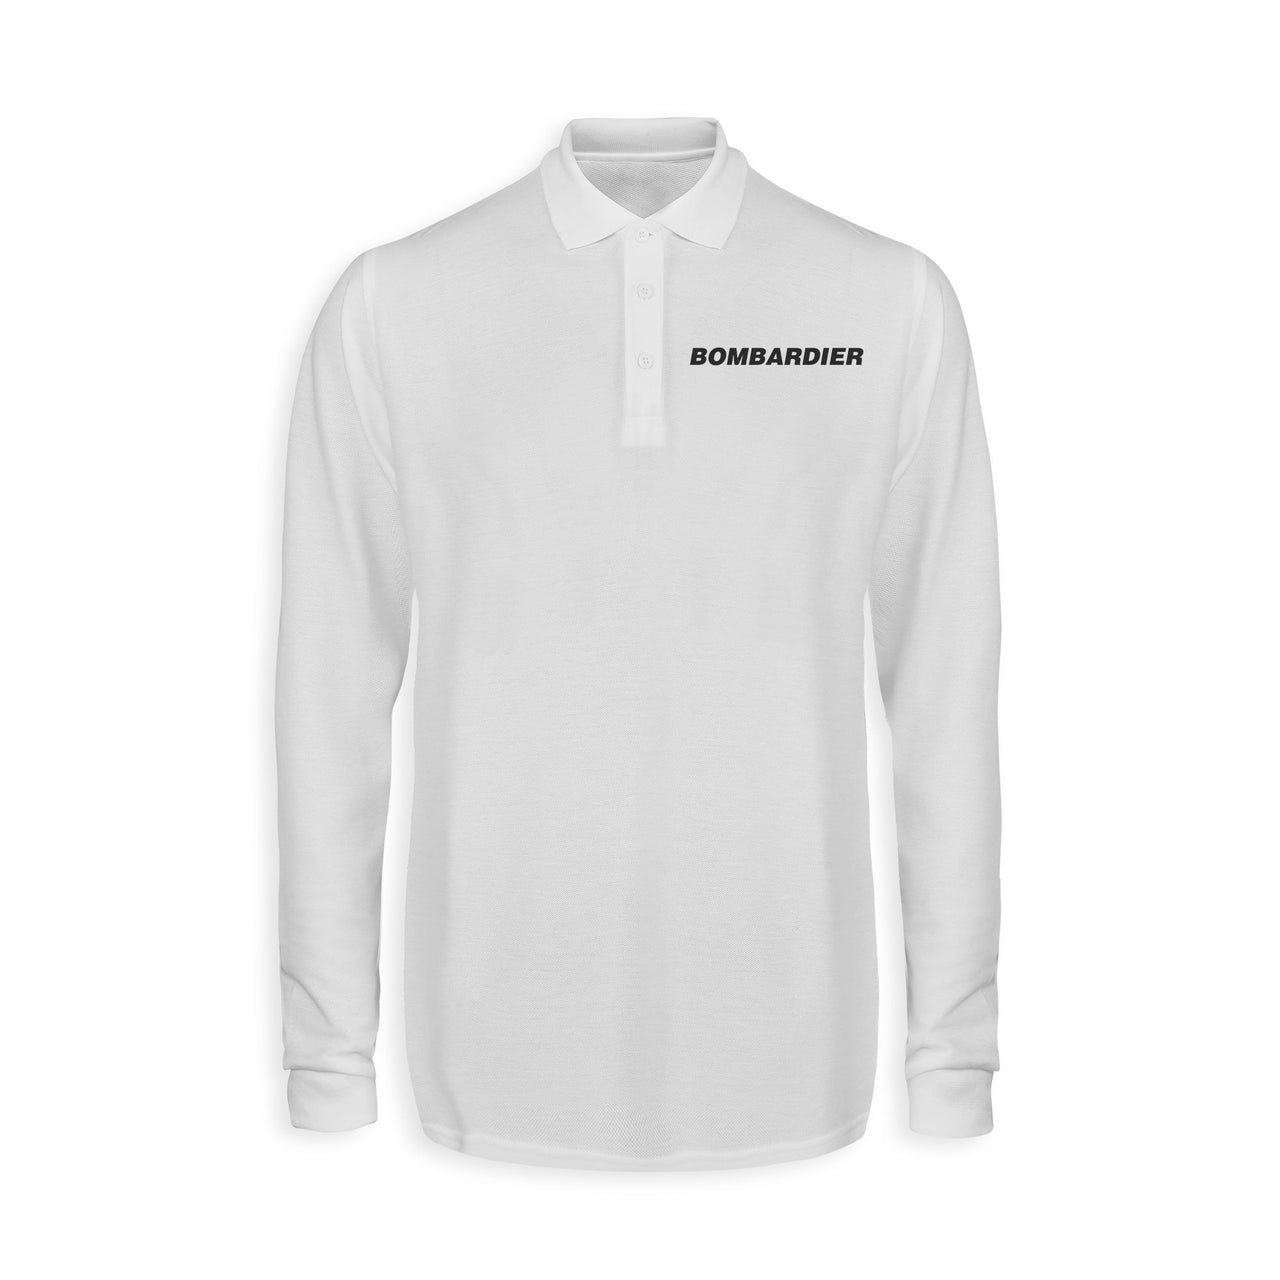 Bombardier & Text Designed Long Sleeve Polo T-Shirts